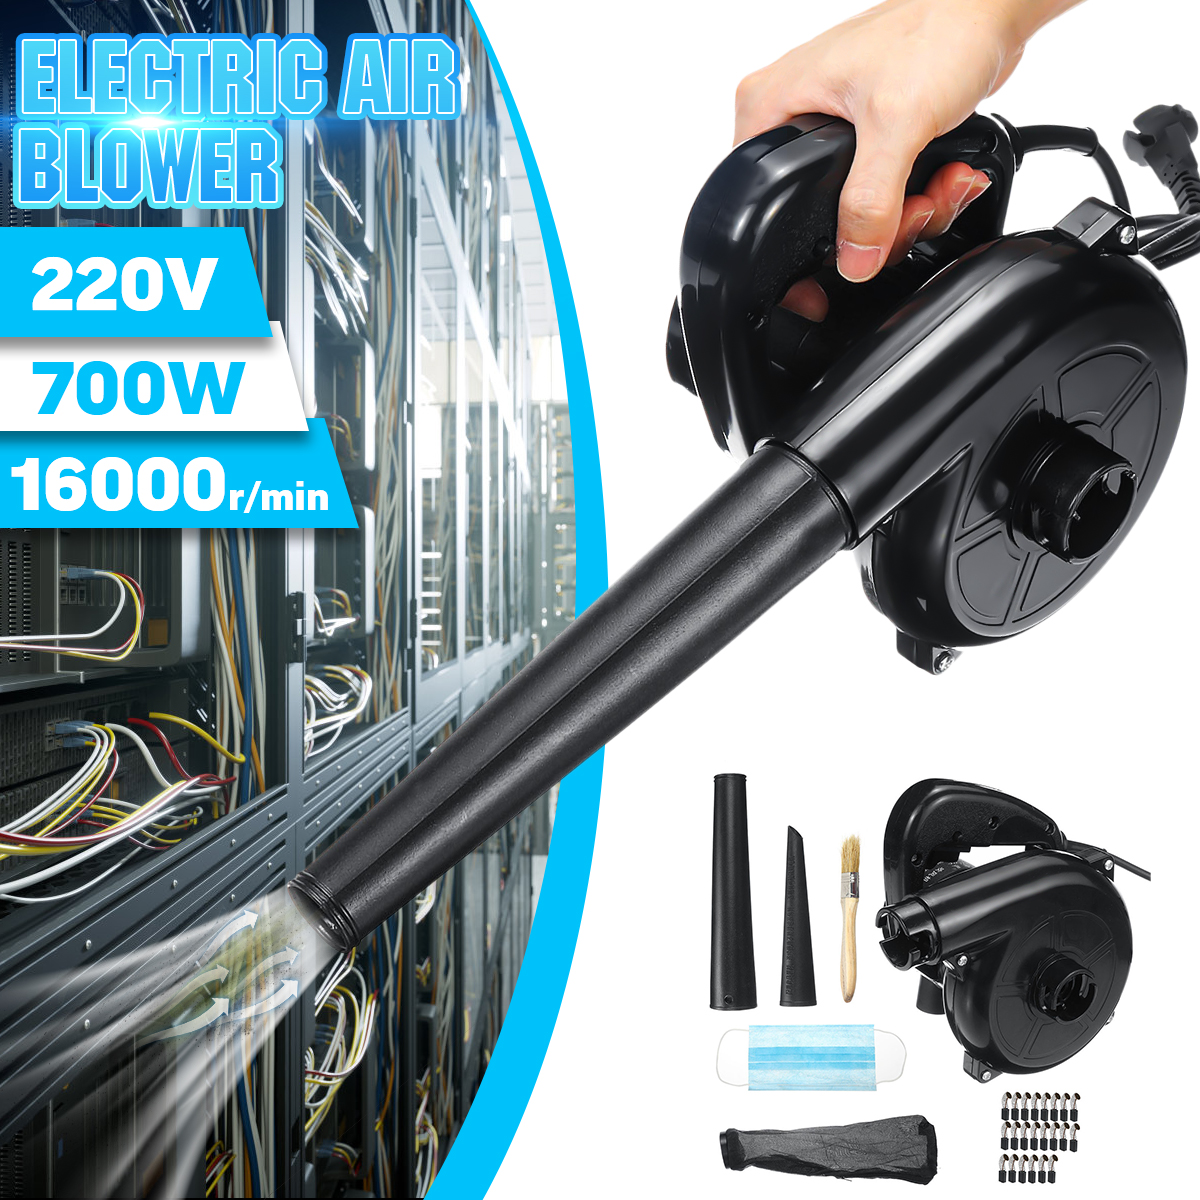 700W-220V-Electric-Air-Blower-Hand-Operated-Car-Computer-Vacuum-Dust-Removing-Cleaner-1648662-2